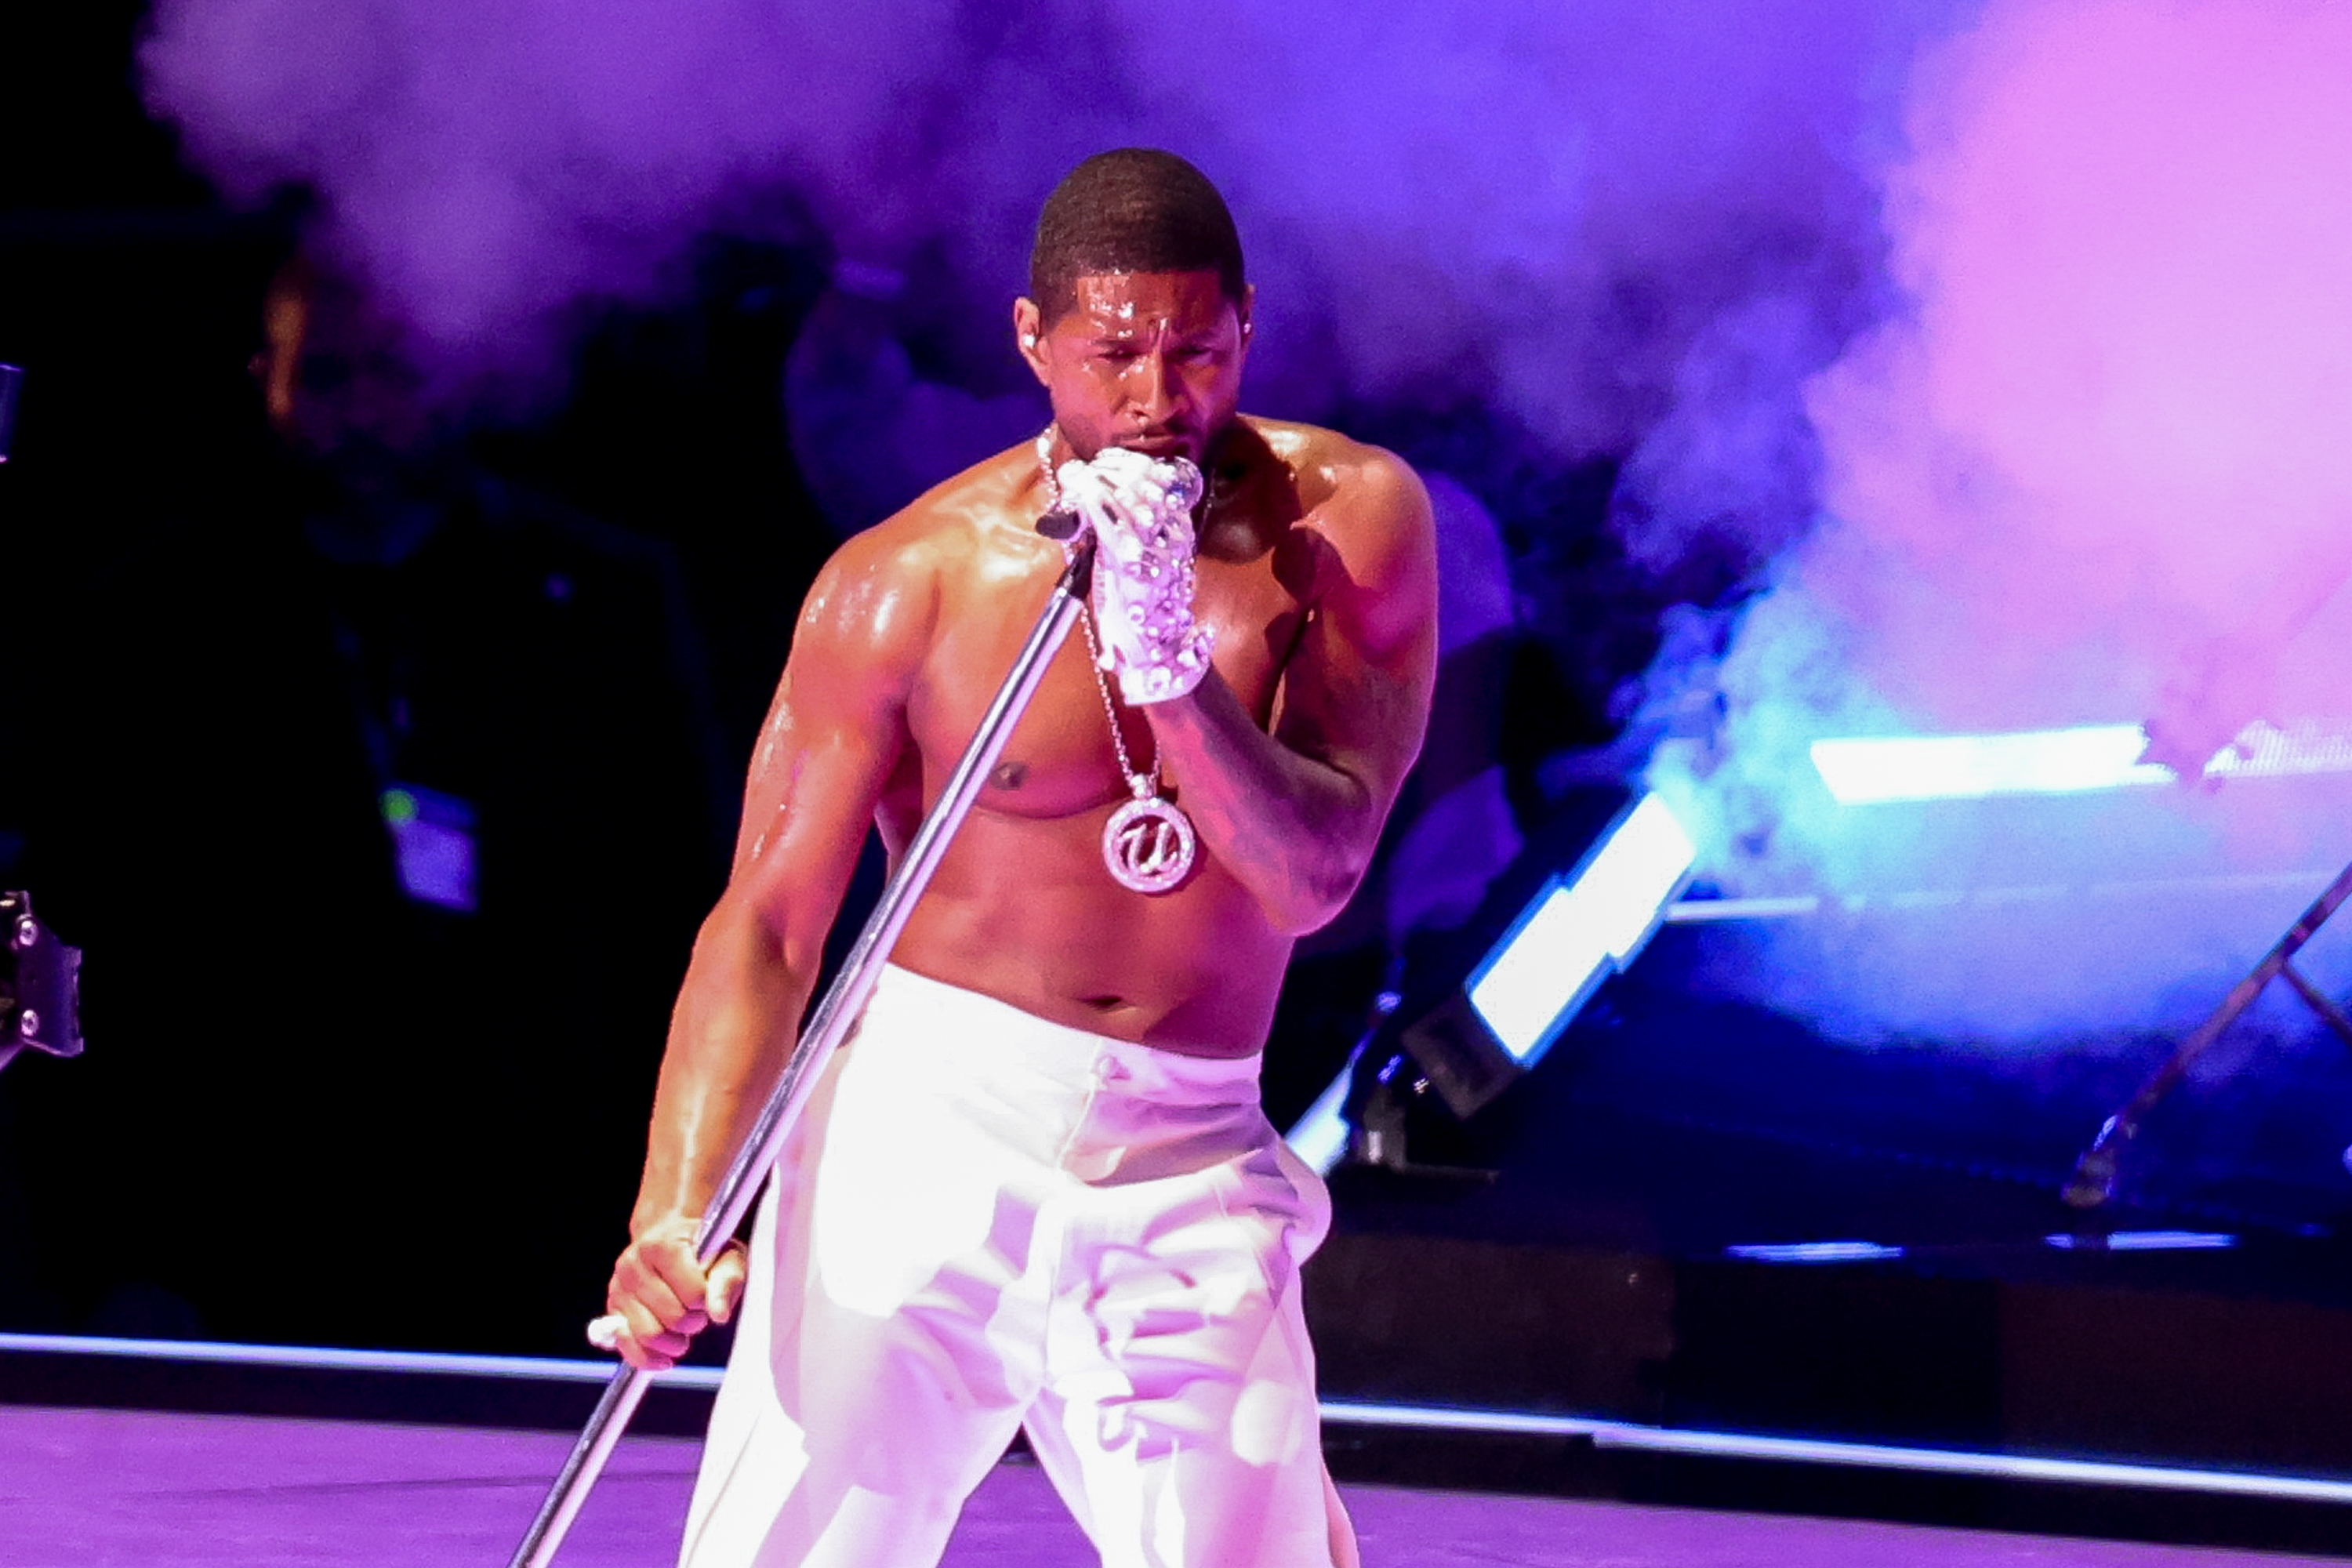 Bare-chested Usher performing at the halftime show